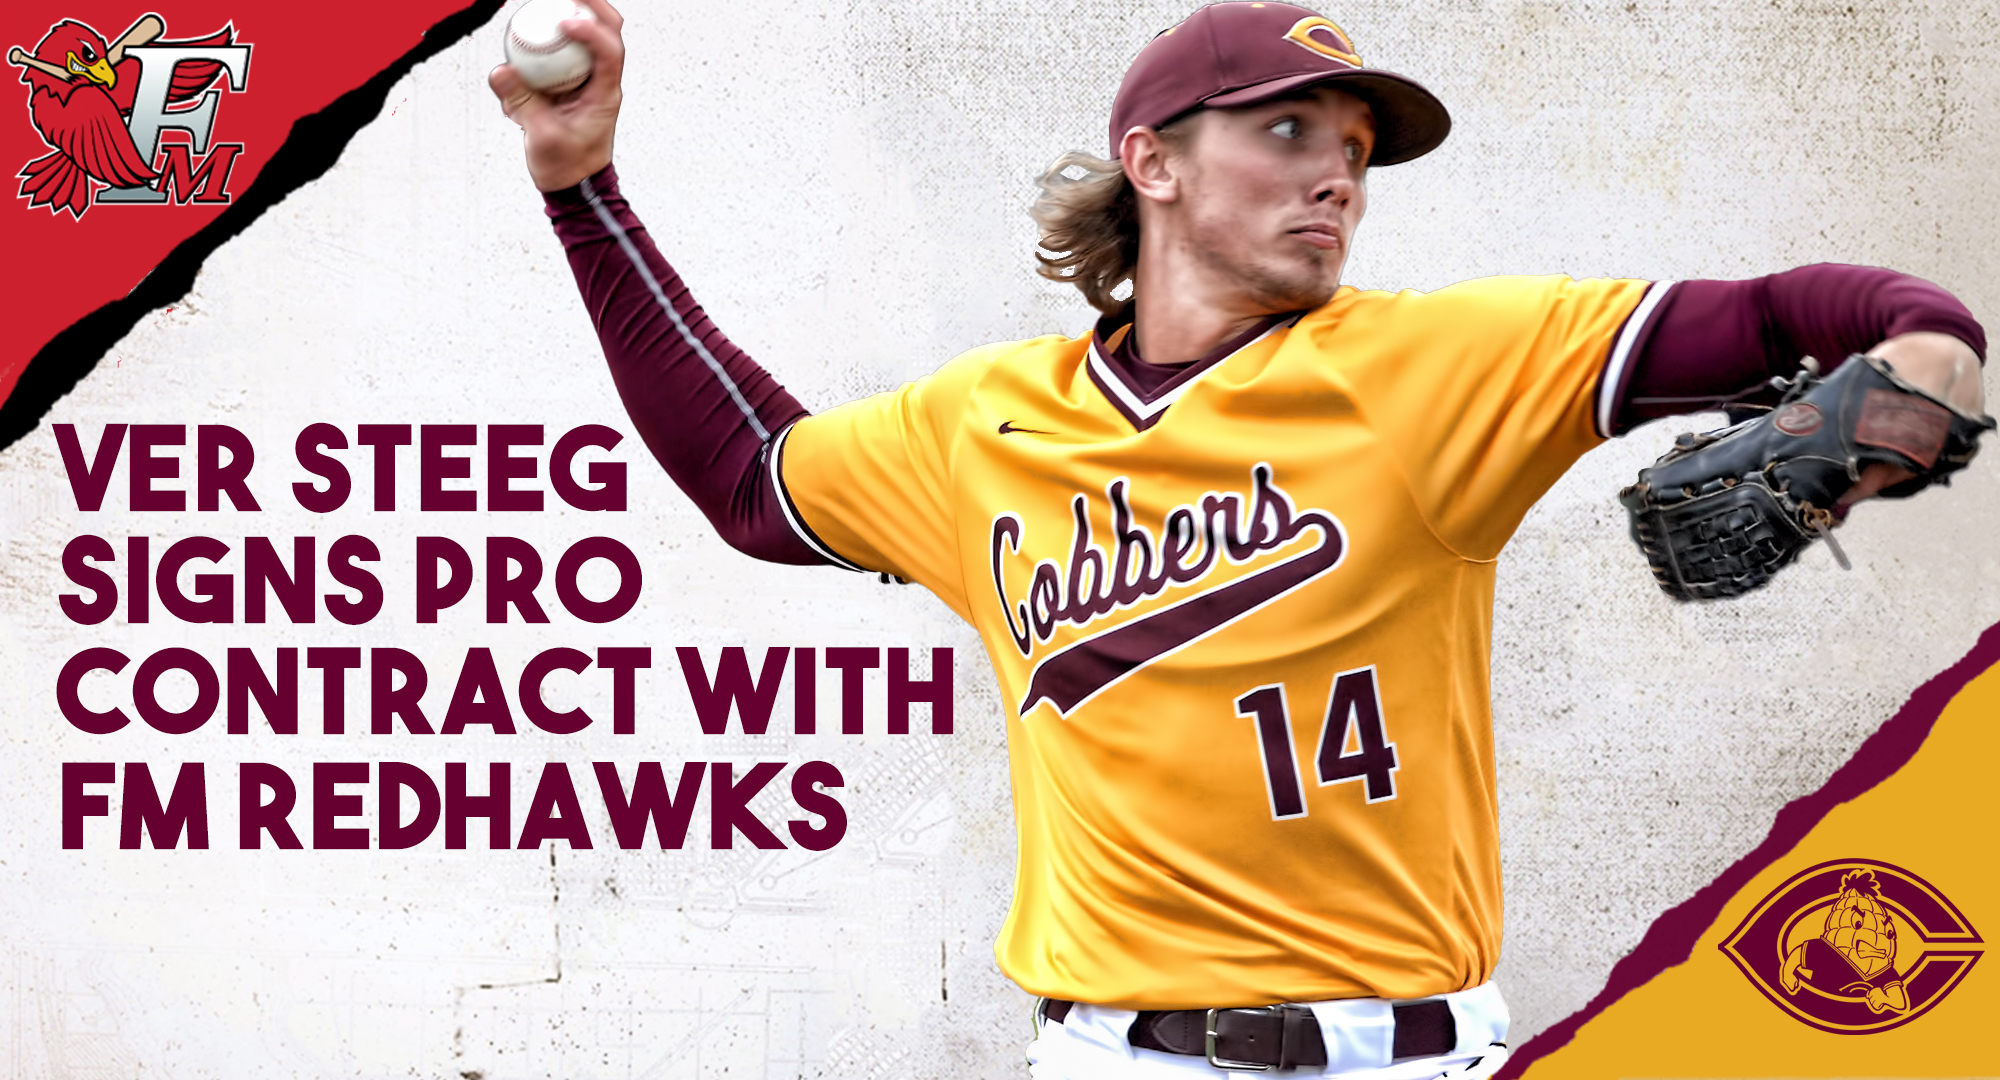 The Fargo-Moorhead Redhawks announced that they have signed former Cobber All-Region pitcher Austin Ver Steeg to a professional, free-agent contract.